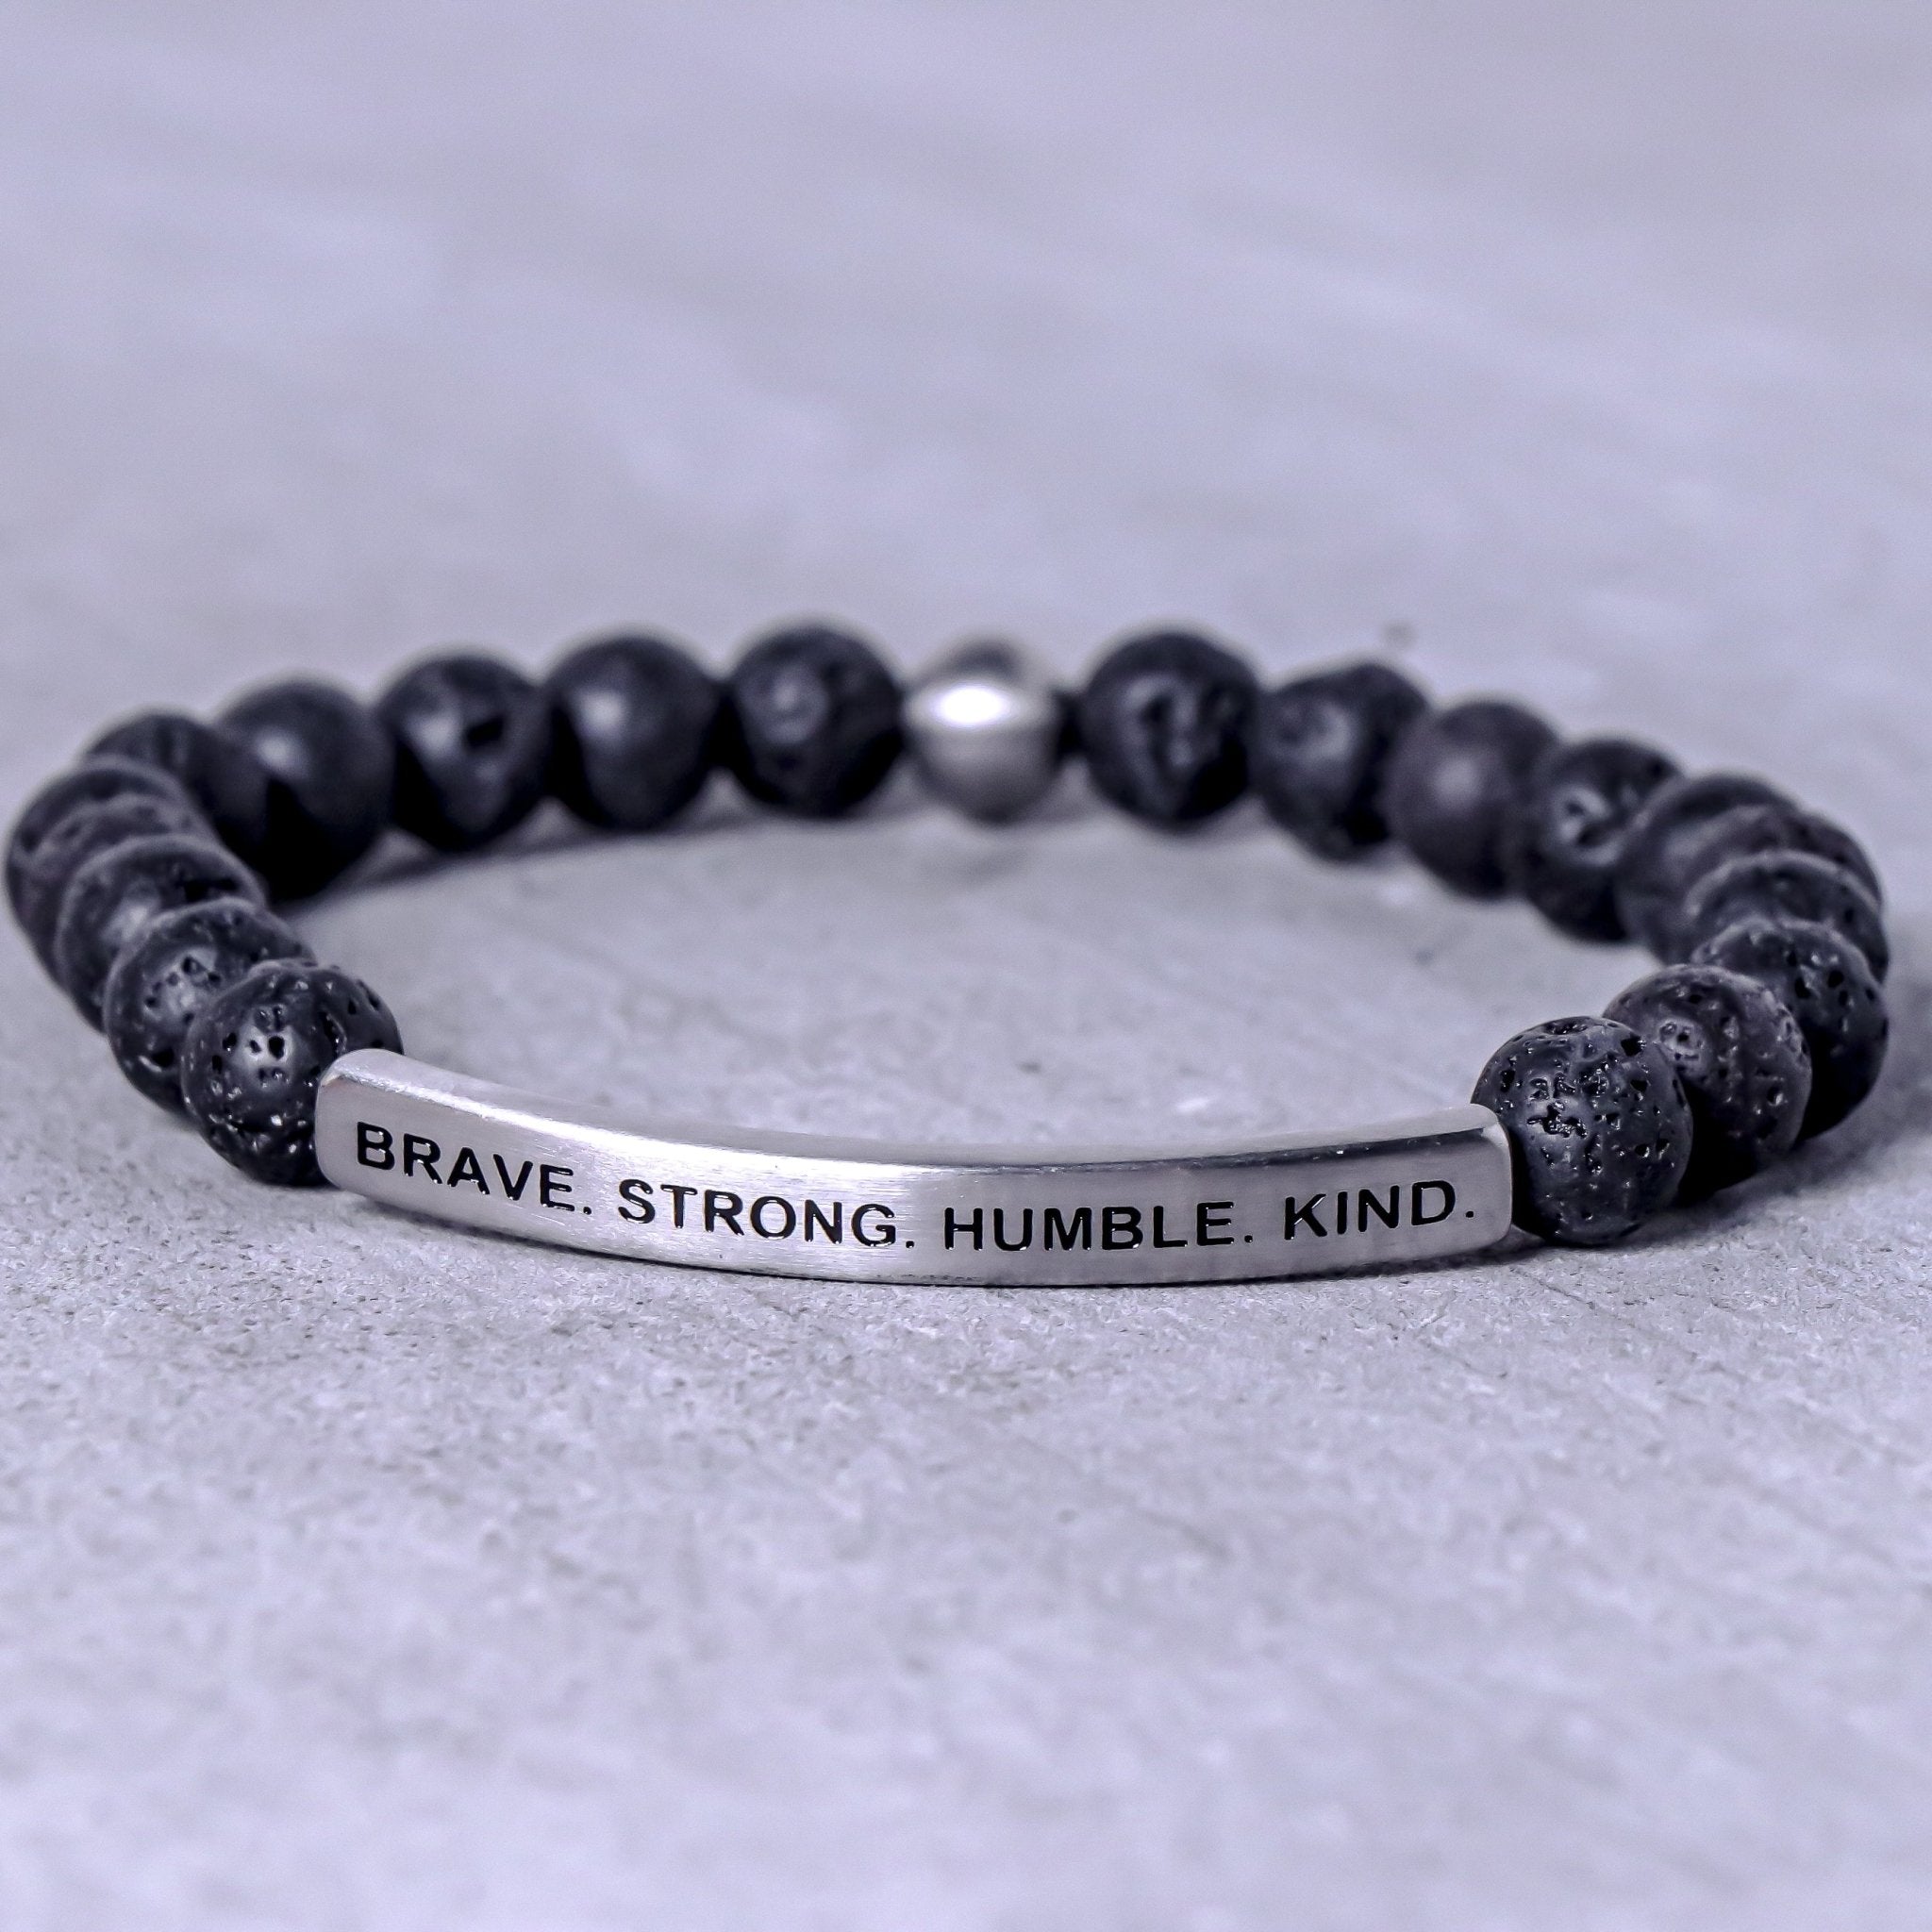 BRAVE - STRONG - HUMBLE - KIND - Mens Collection - Inspiration Co.